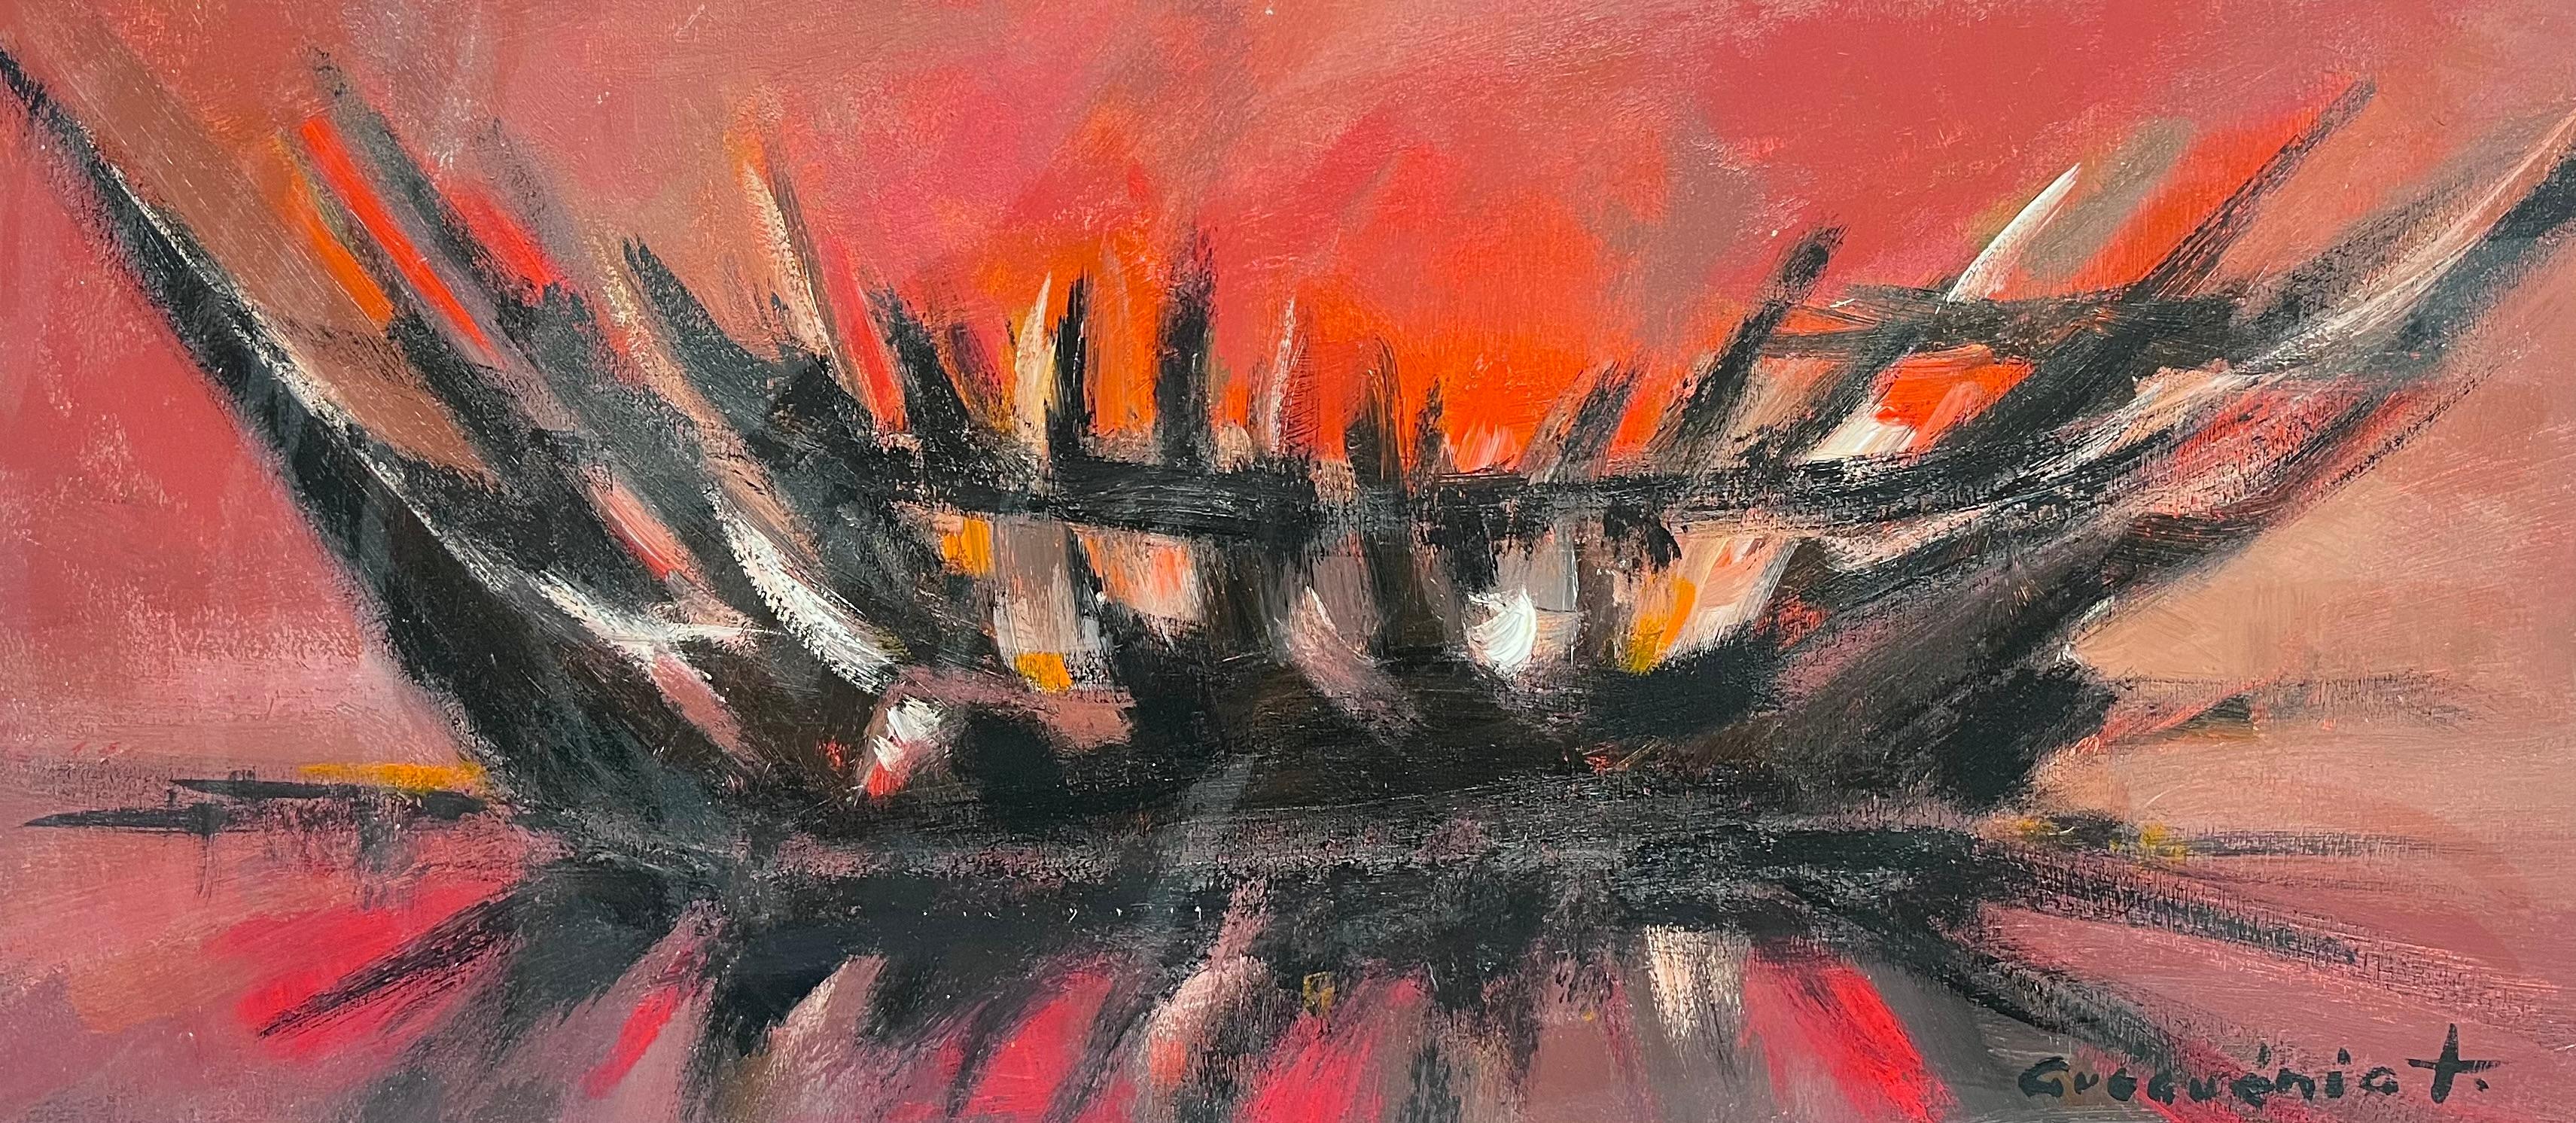 Gerard Guegueniat Landscape Painting - Red and Orange Bonfire French Abstract Expressionist Signed Oil 